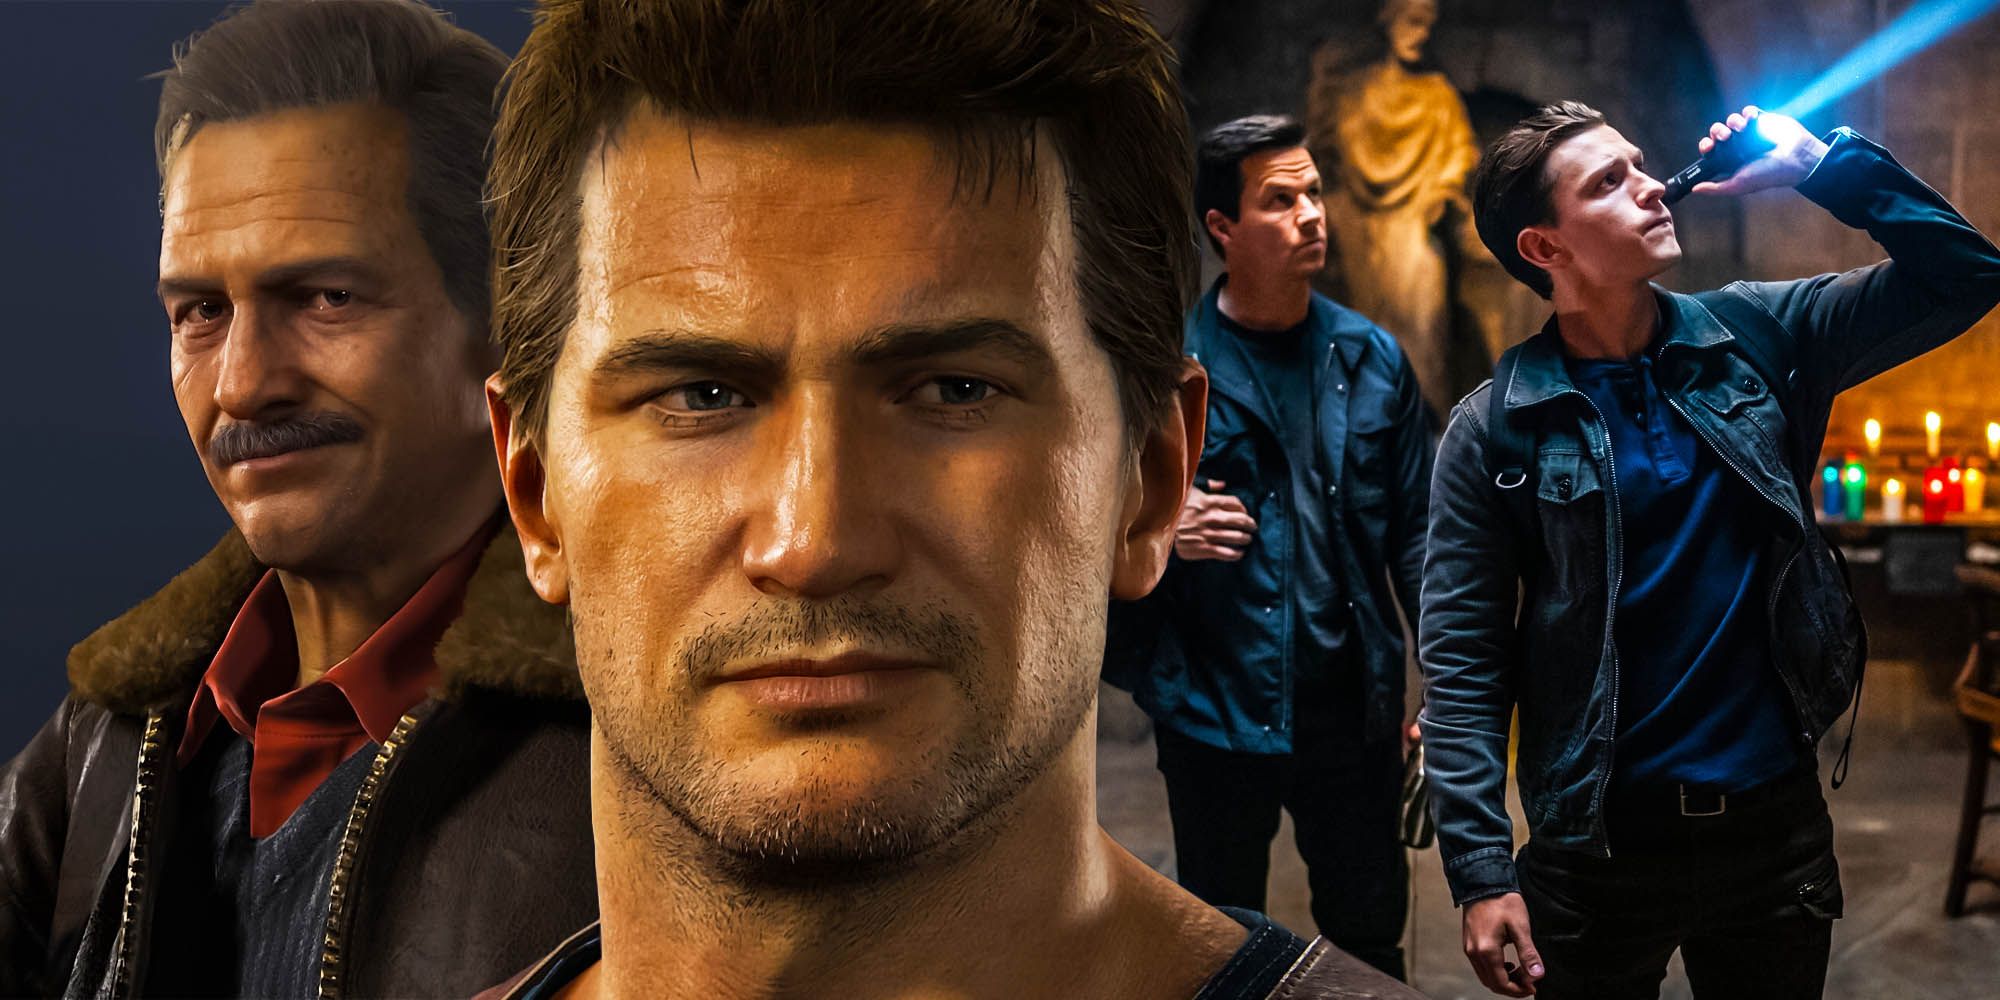 Uncharted - Análise Filme - Uncharted (Movie) - Gamereactor